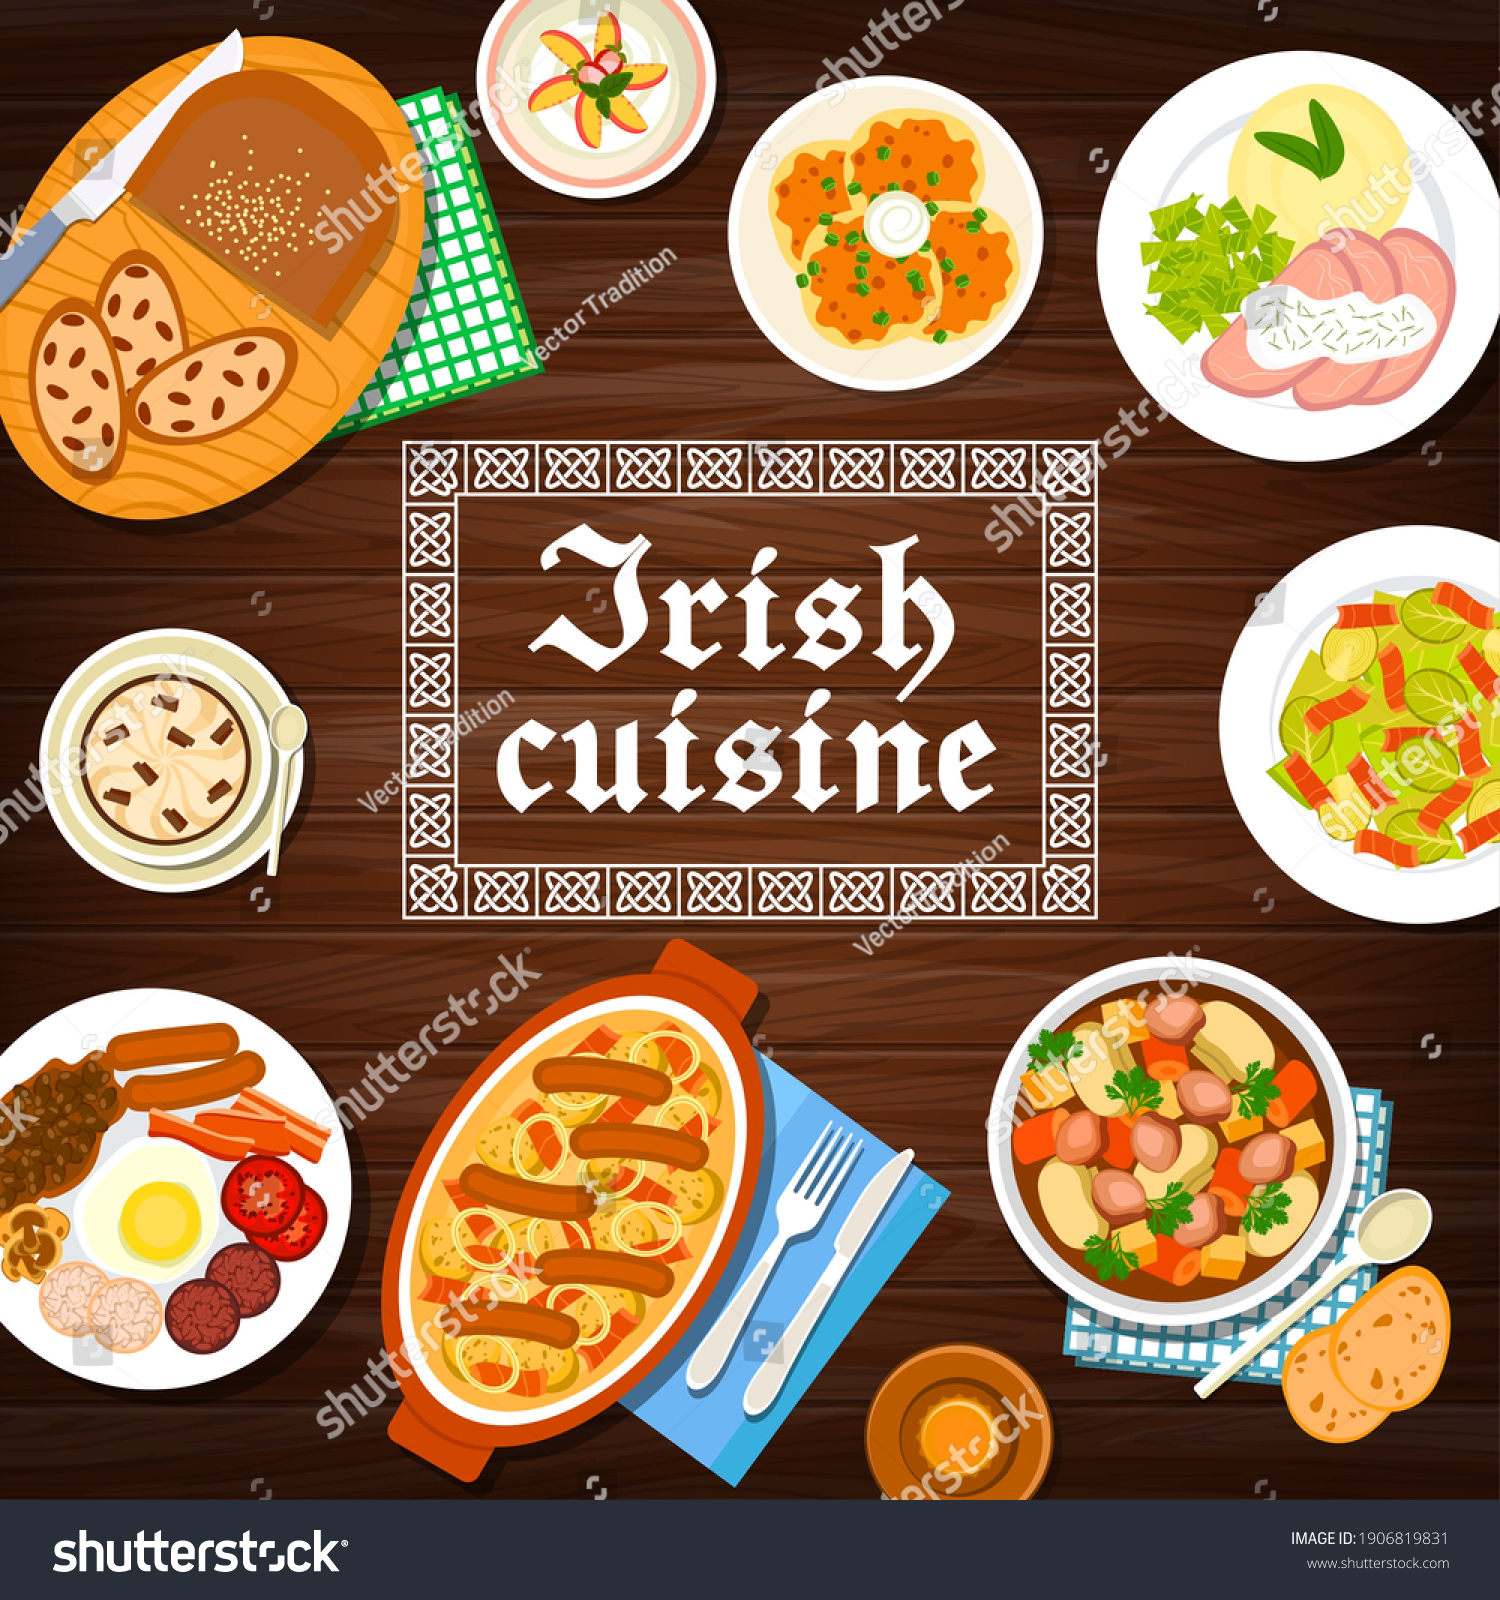 SVG of Irish cuisine food menu, breakfast dishes, meals of Ireland, vector stew, pudding and bread with raisins. Irish restaurant traditional cuisine food lamb and beef meat, Irish coffee and Dublin coddle svg